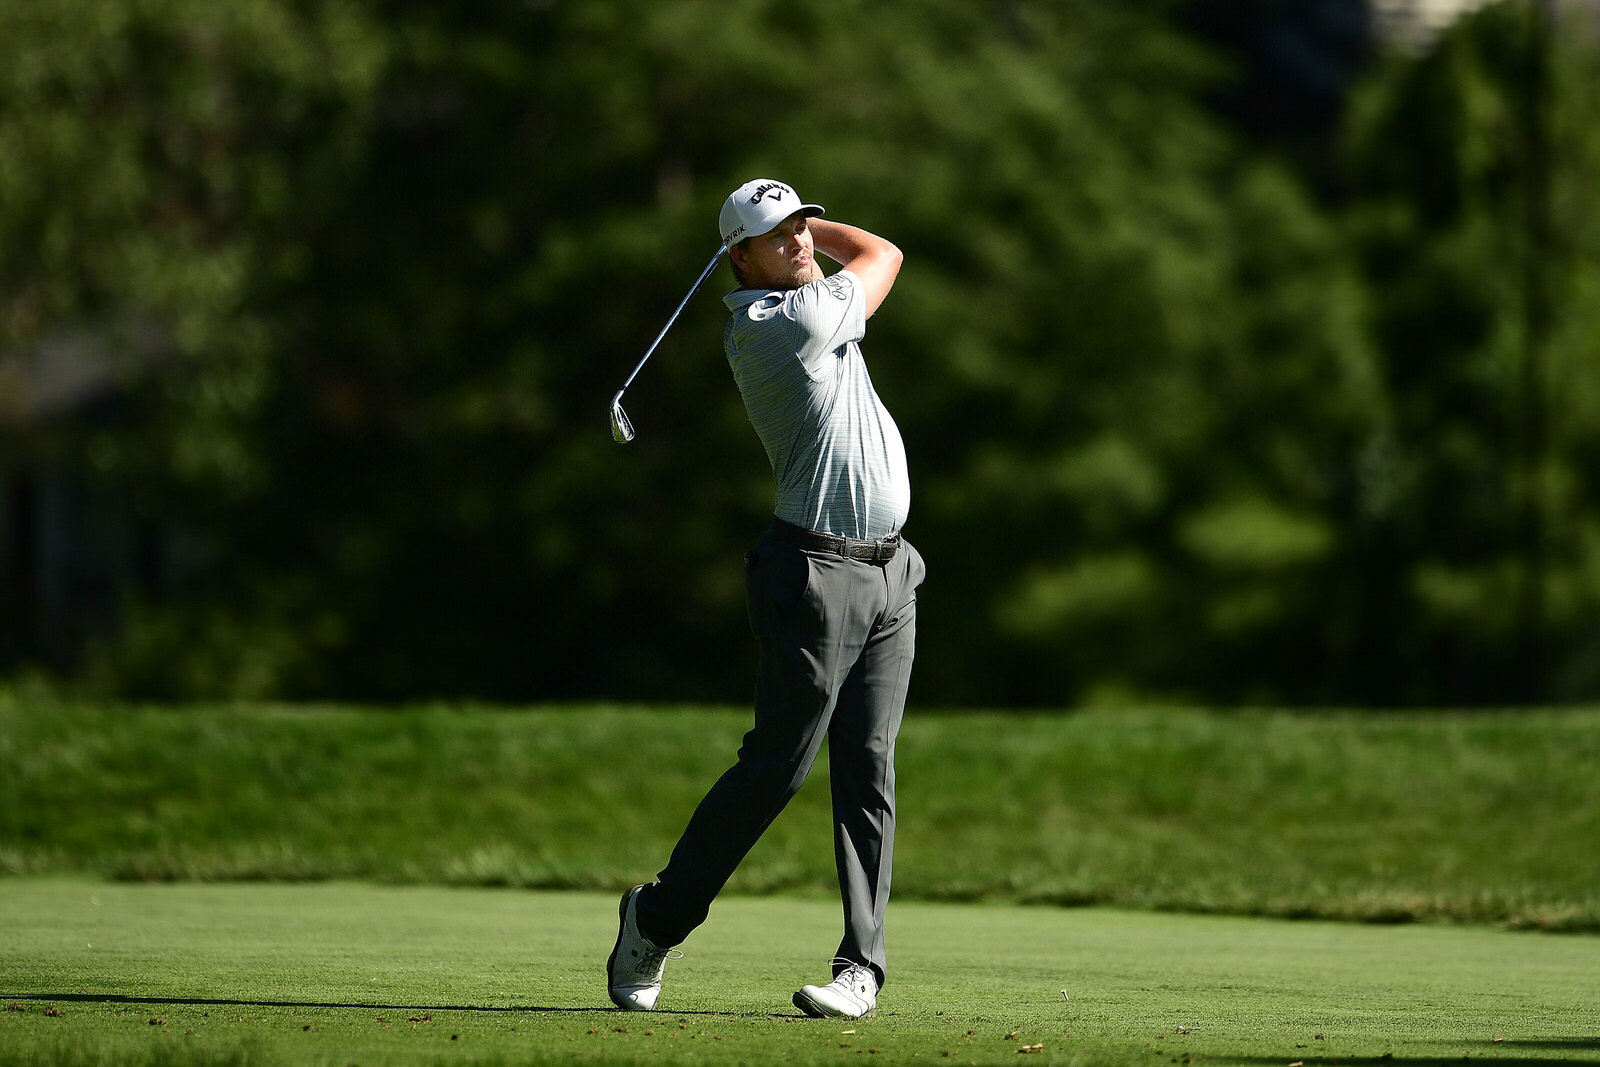  DETROIT, MICHIGAN - JULY 03: Chris Stroud of the United States plays his shot from the ninth tee during the second round of the Rocket Mortgage Classic on July 03, 2020 at the Detroit Golf Club in Detroit, Michigan. (Photo by Stacy Revere/Getty Imag